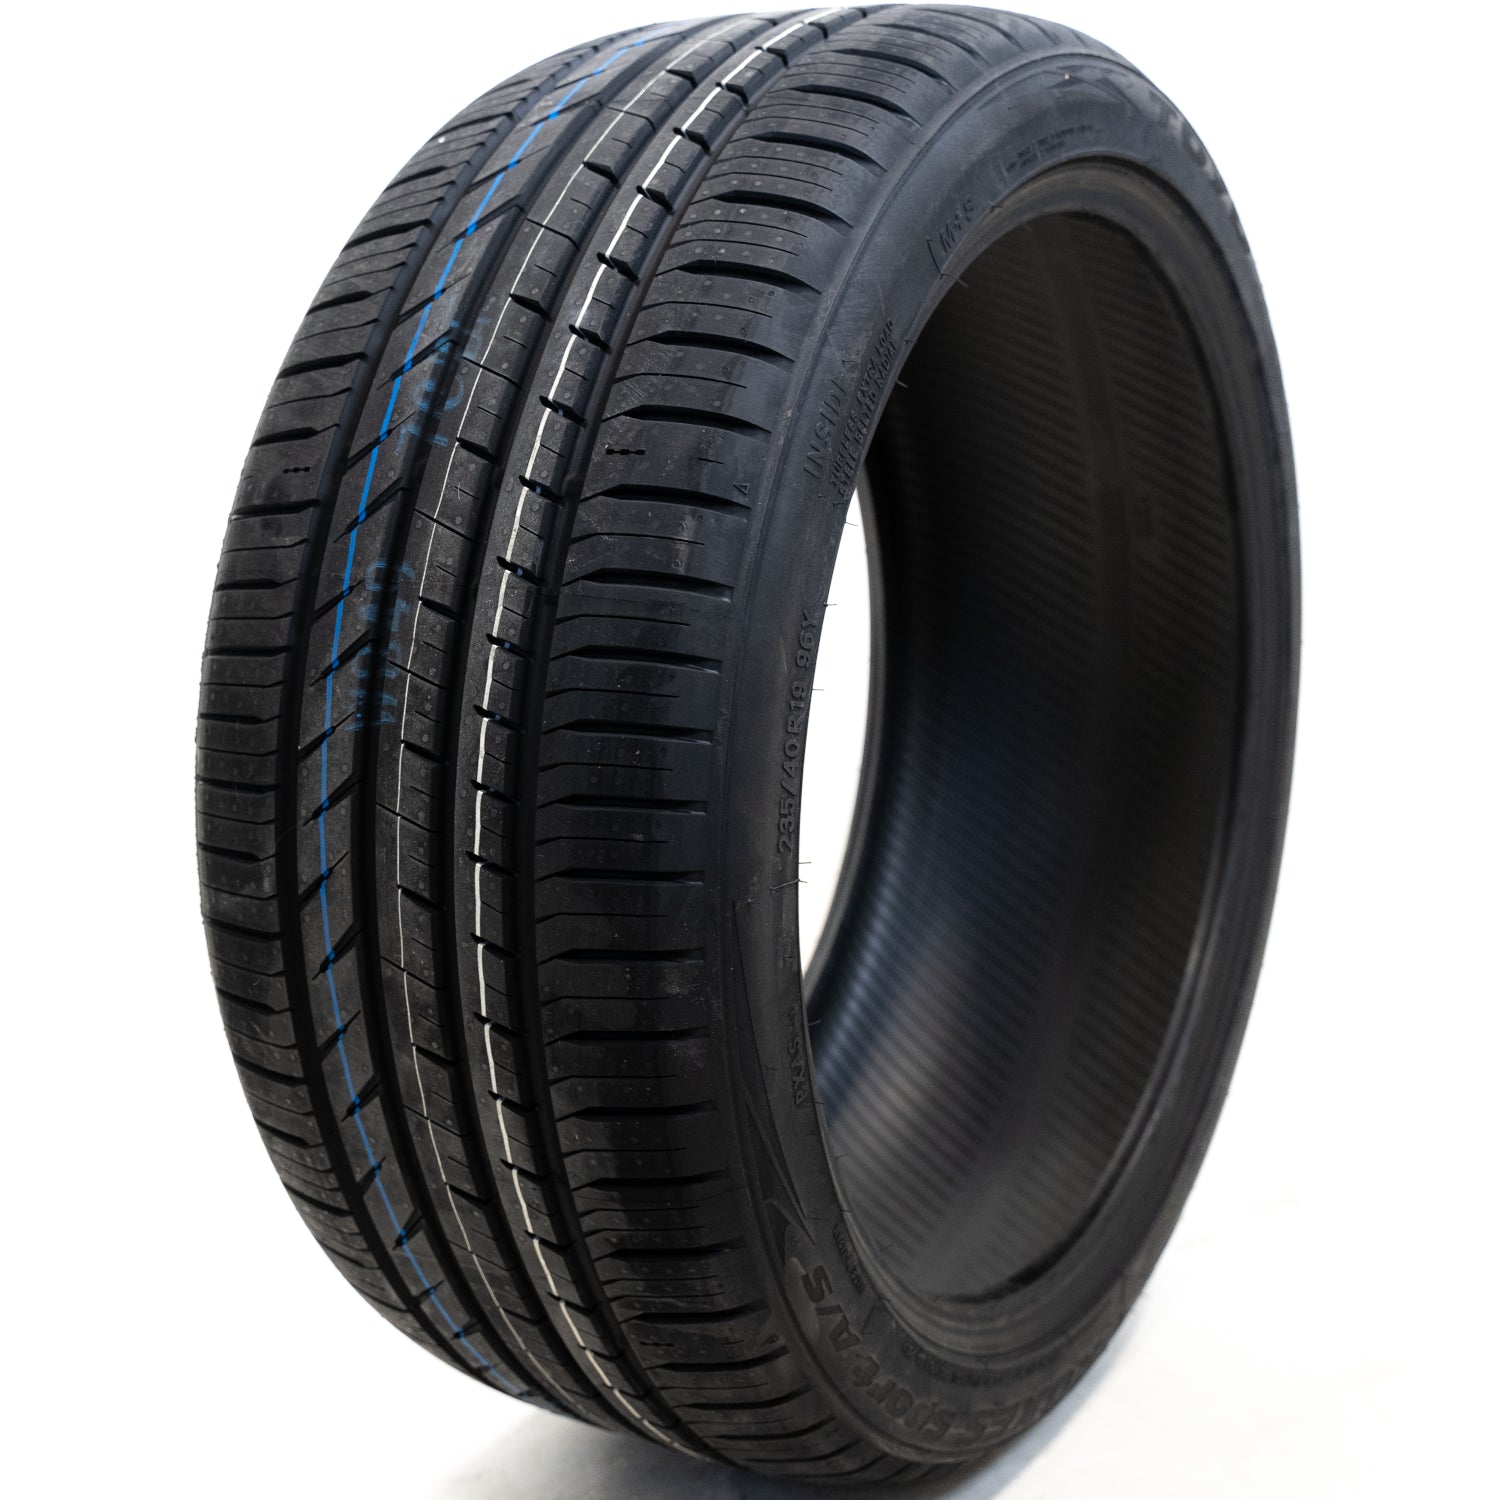 TOYO TIRES PROXES SPORT A/S 245/45R17XL (25.7X9.7R 17) Tires